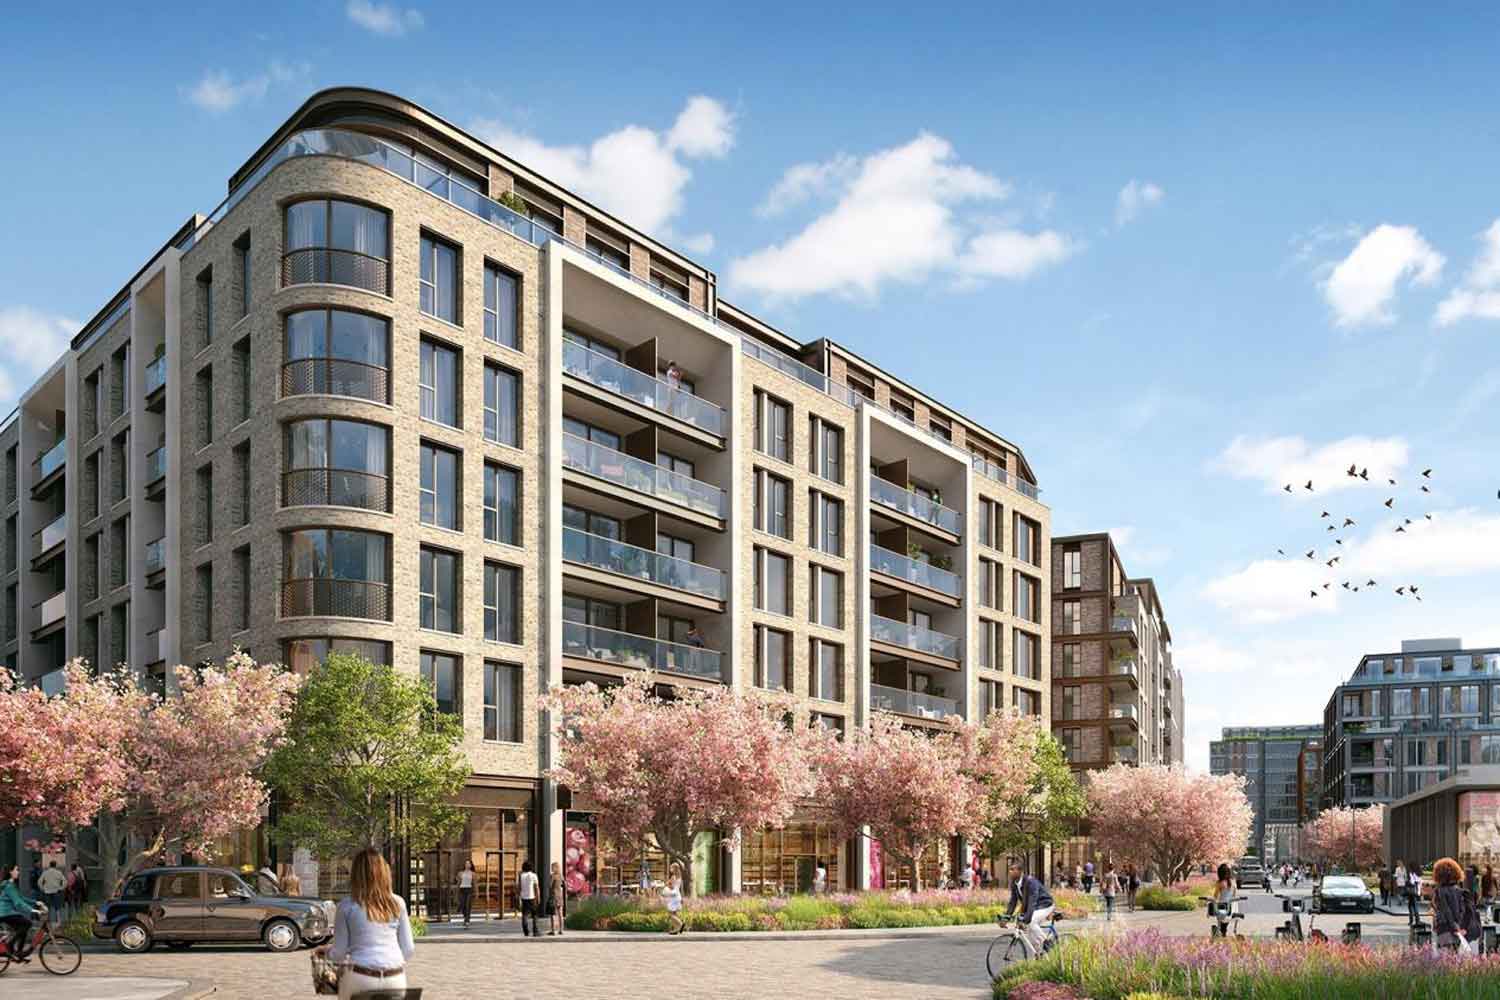 King's Road Park in Fulham priced in the range of £2.5-6.5 million.